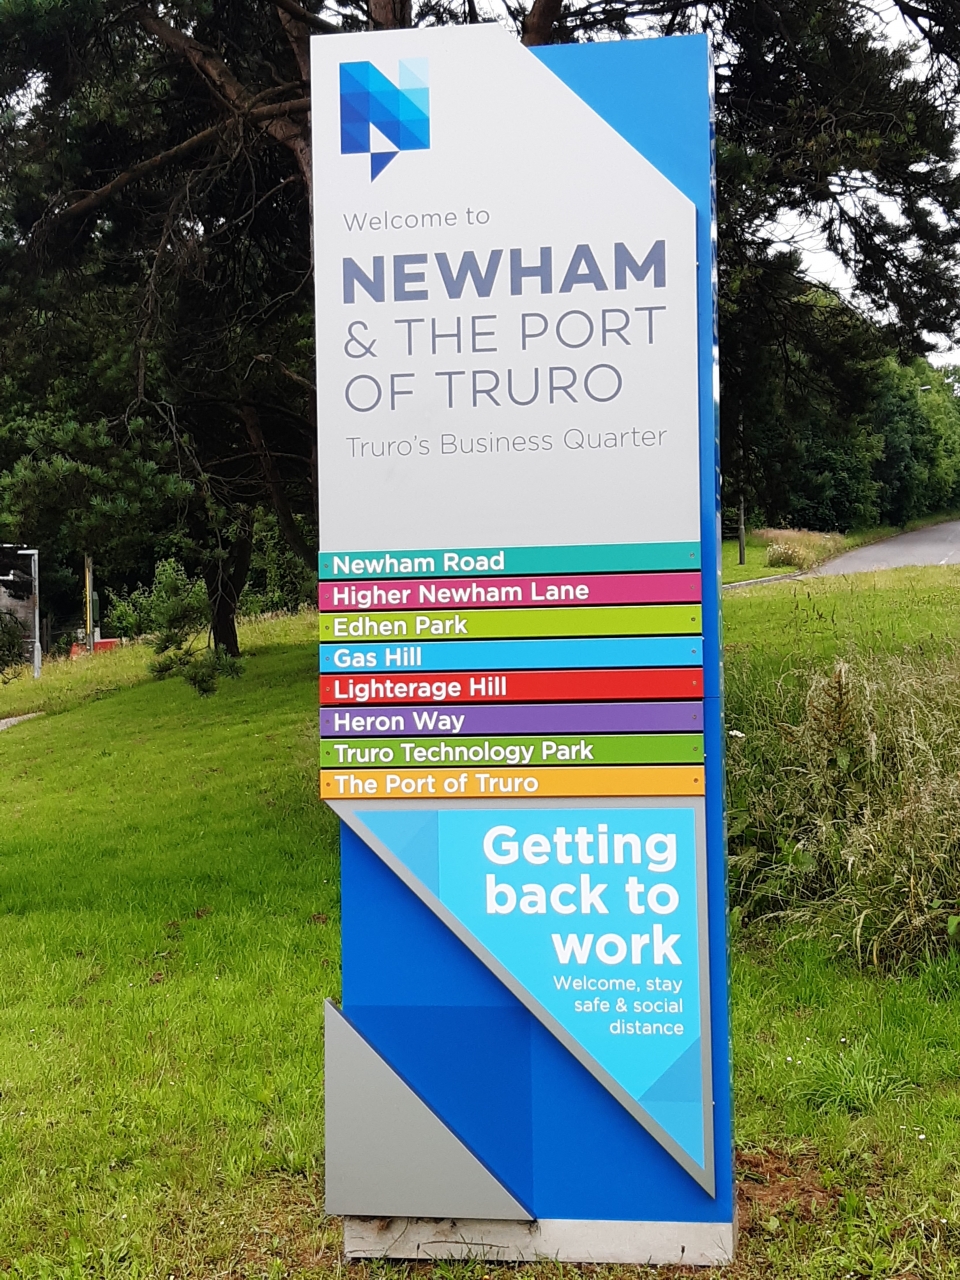 BID team helps Newham open for business